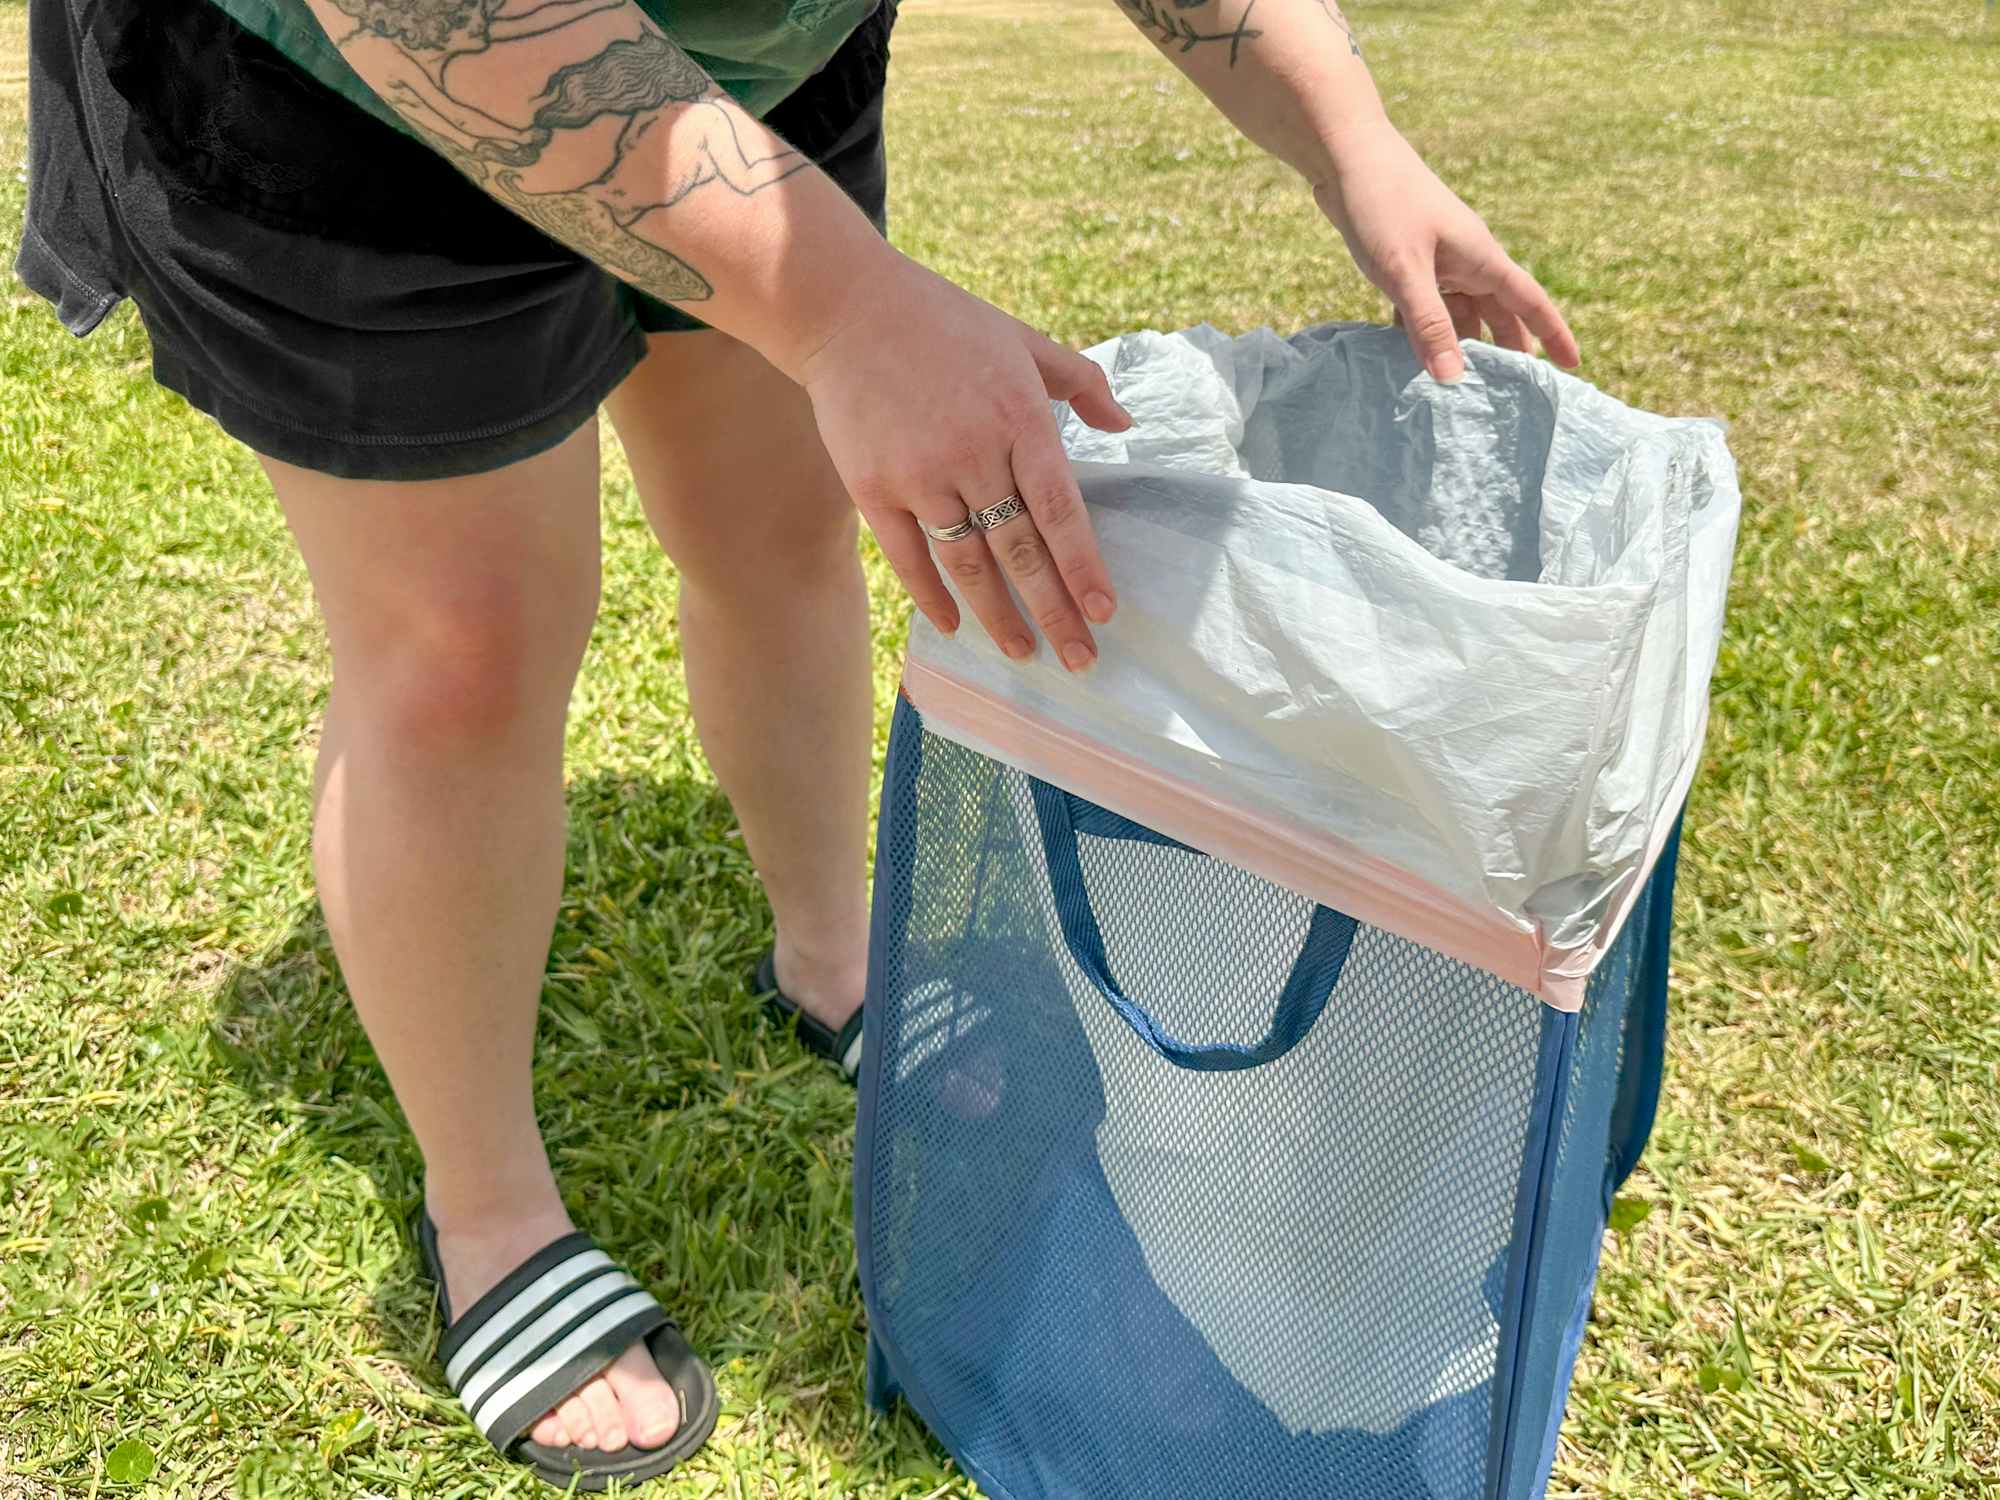 Someone putting a trash bag into a foldable laundry basket to use it as a trash can while camping